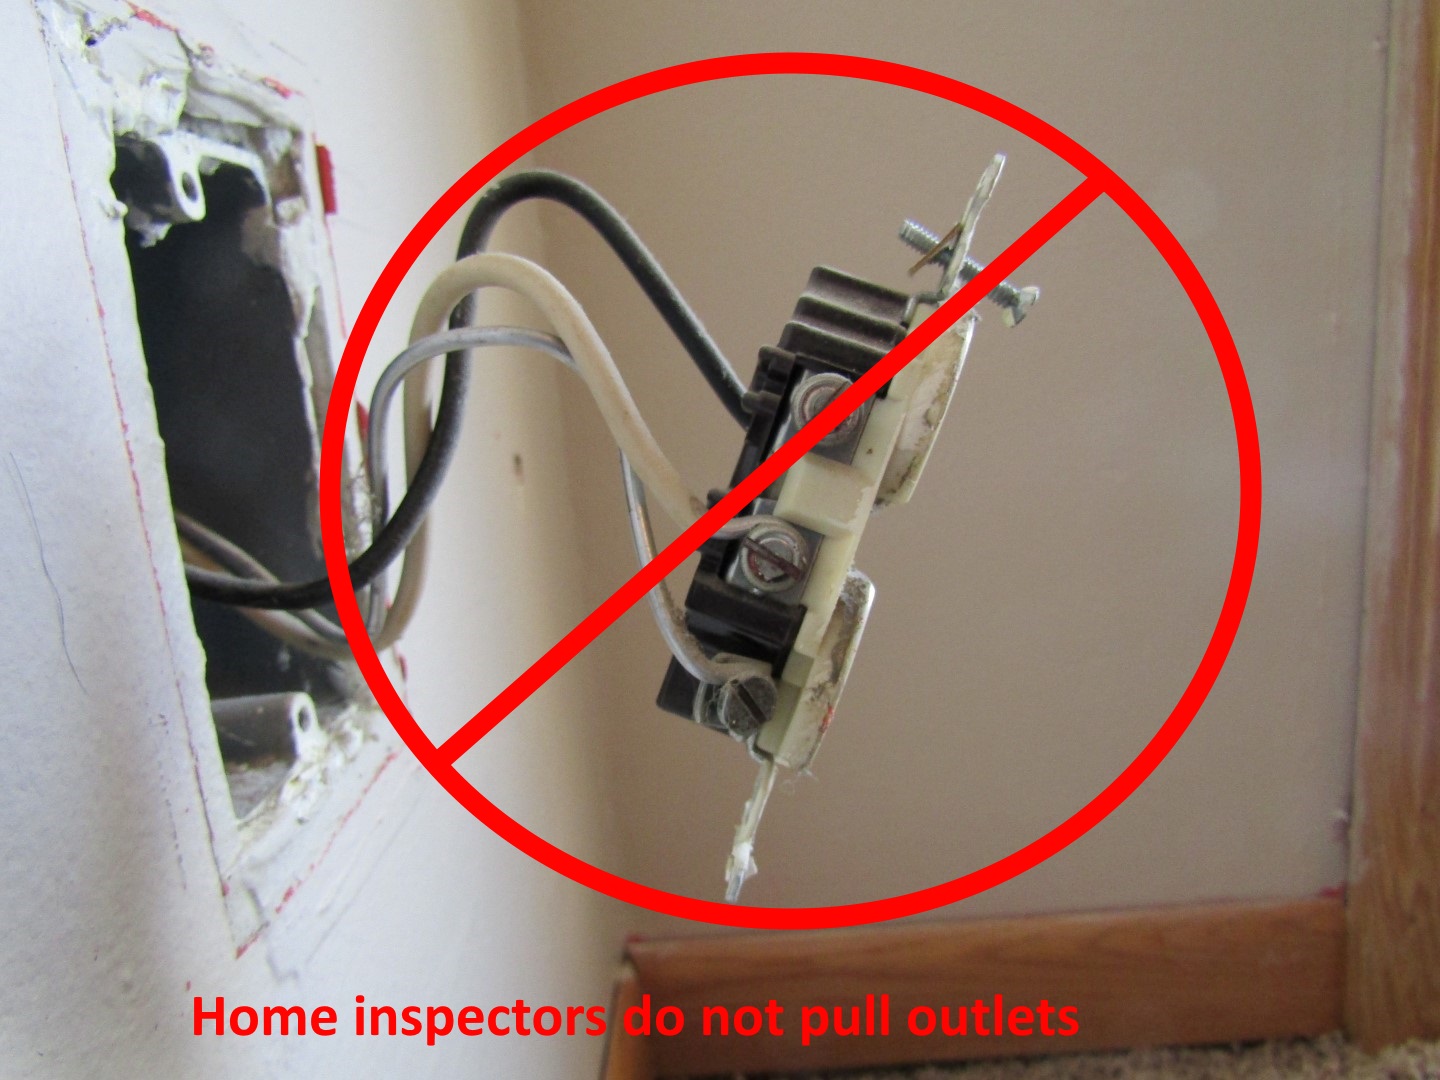 Hazards With Aluminum Wiring, How To Fix Aluminum Wiring In A House